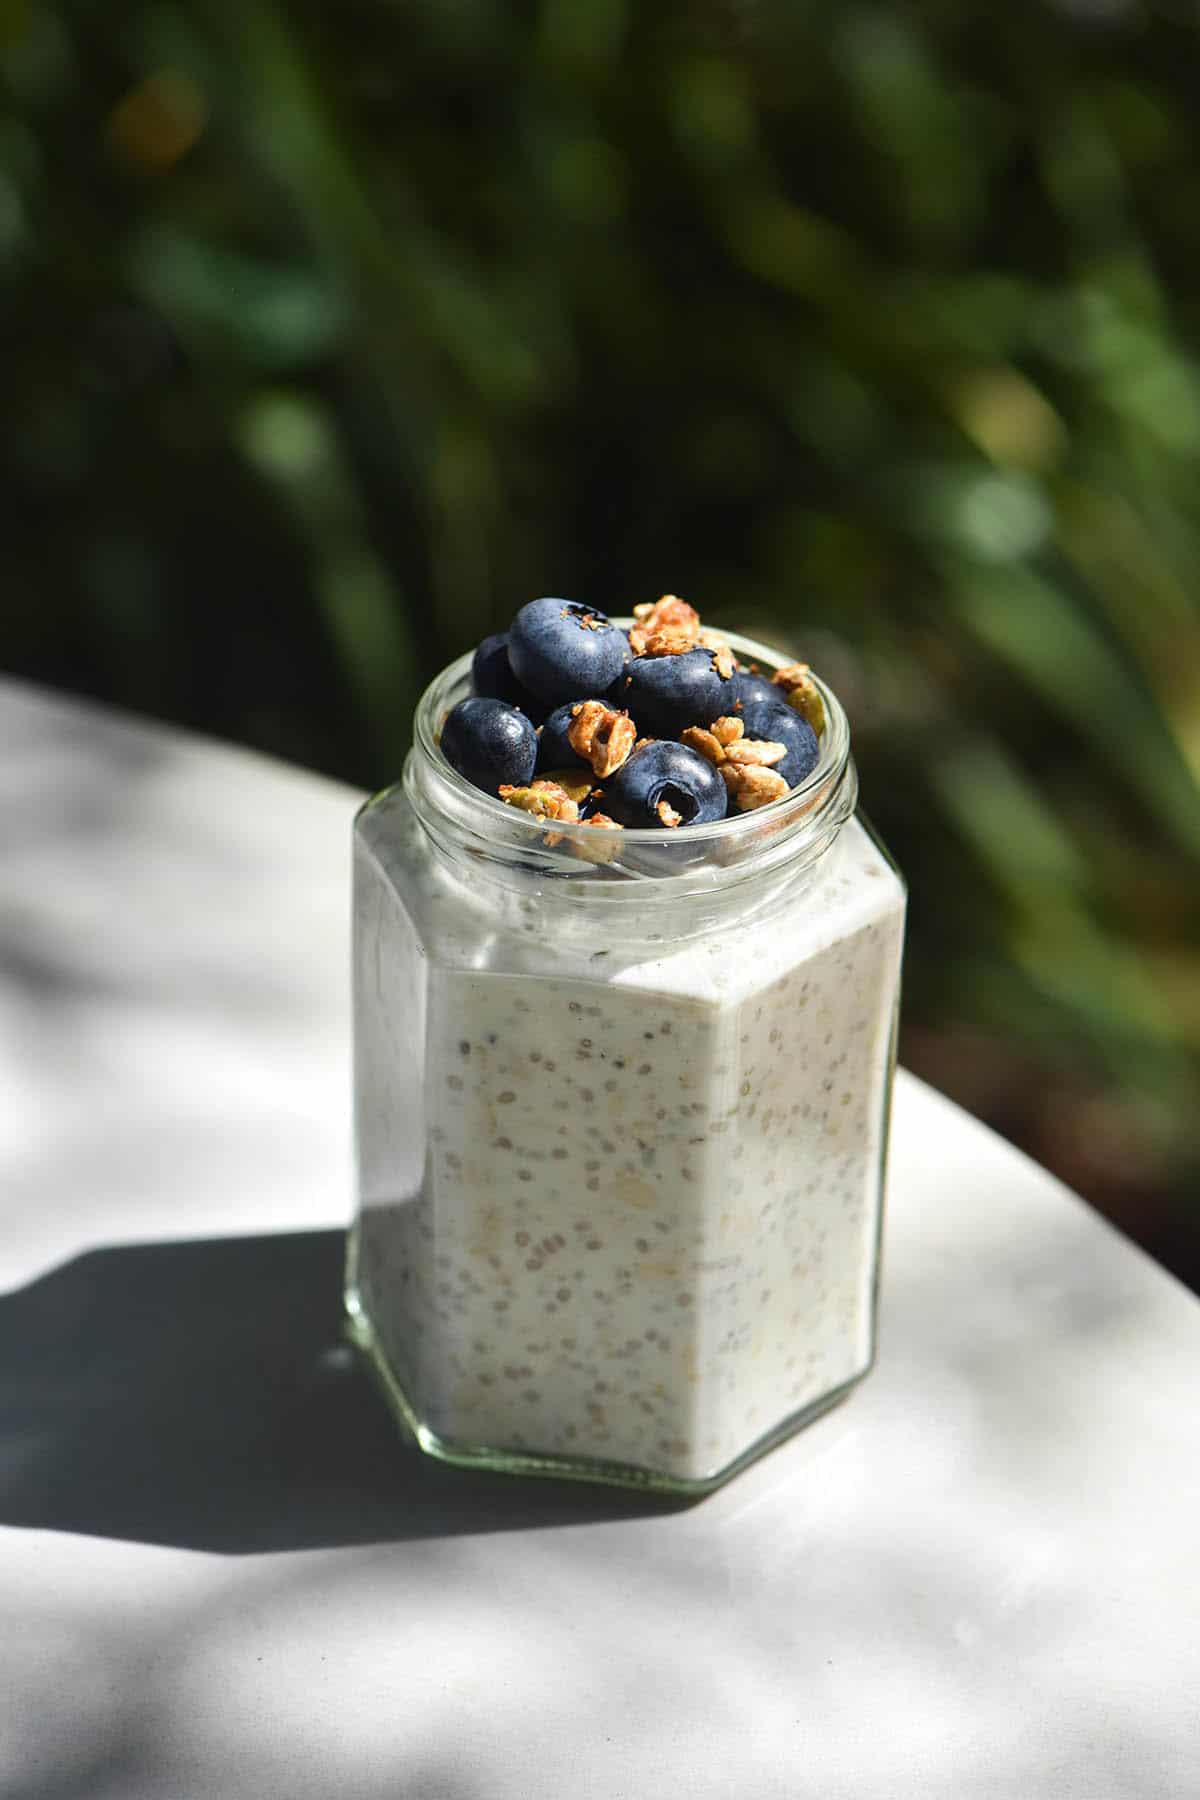 A sunlit image of a glass jar filled with low FODMAP overnight oats on a grey outdoor table against a leafy green bokeh backdrop